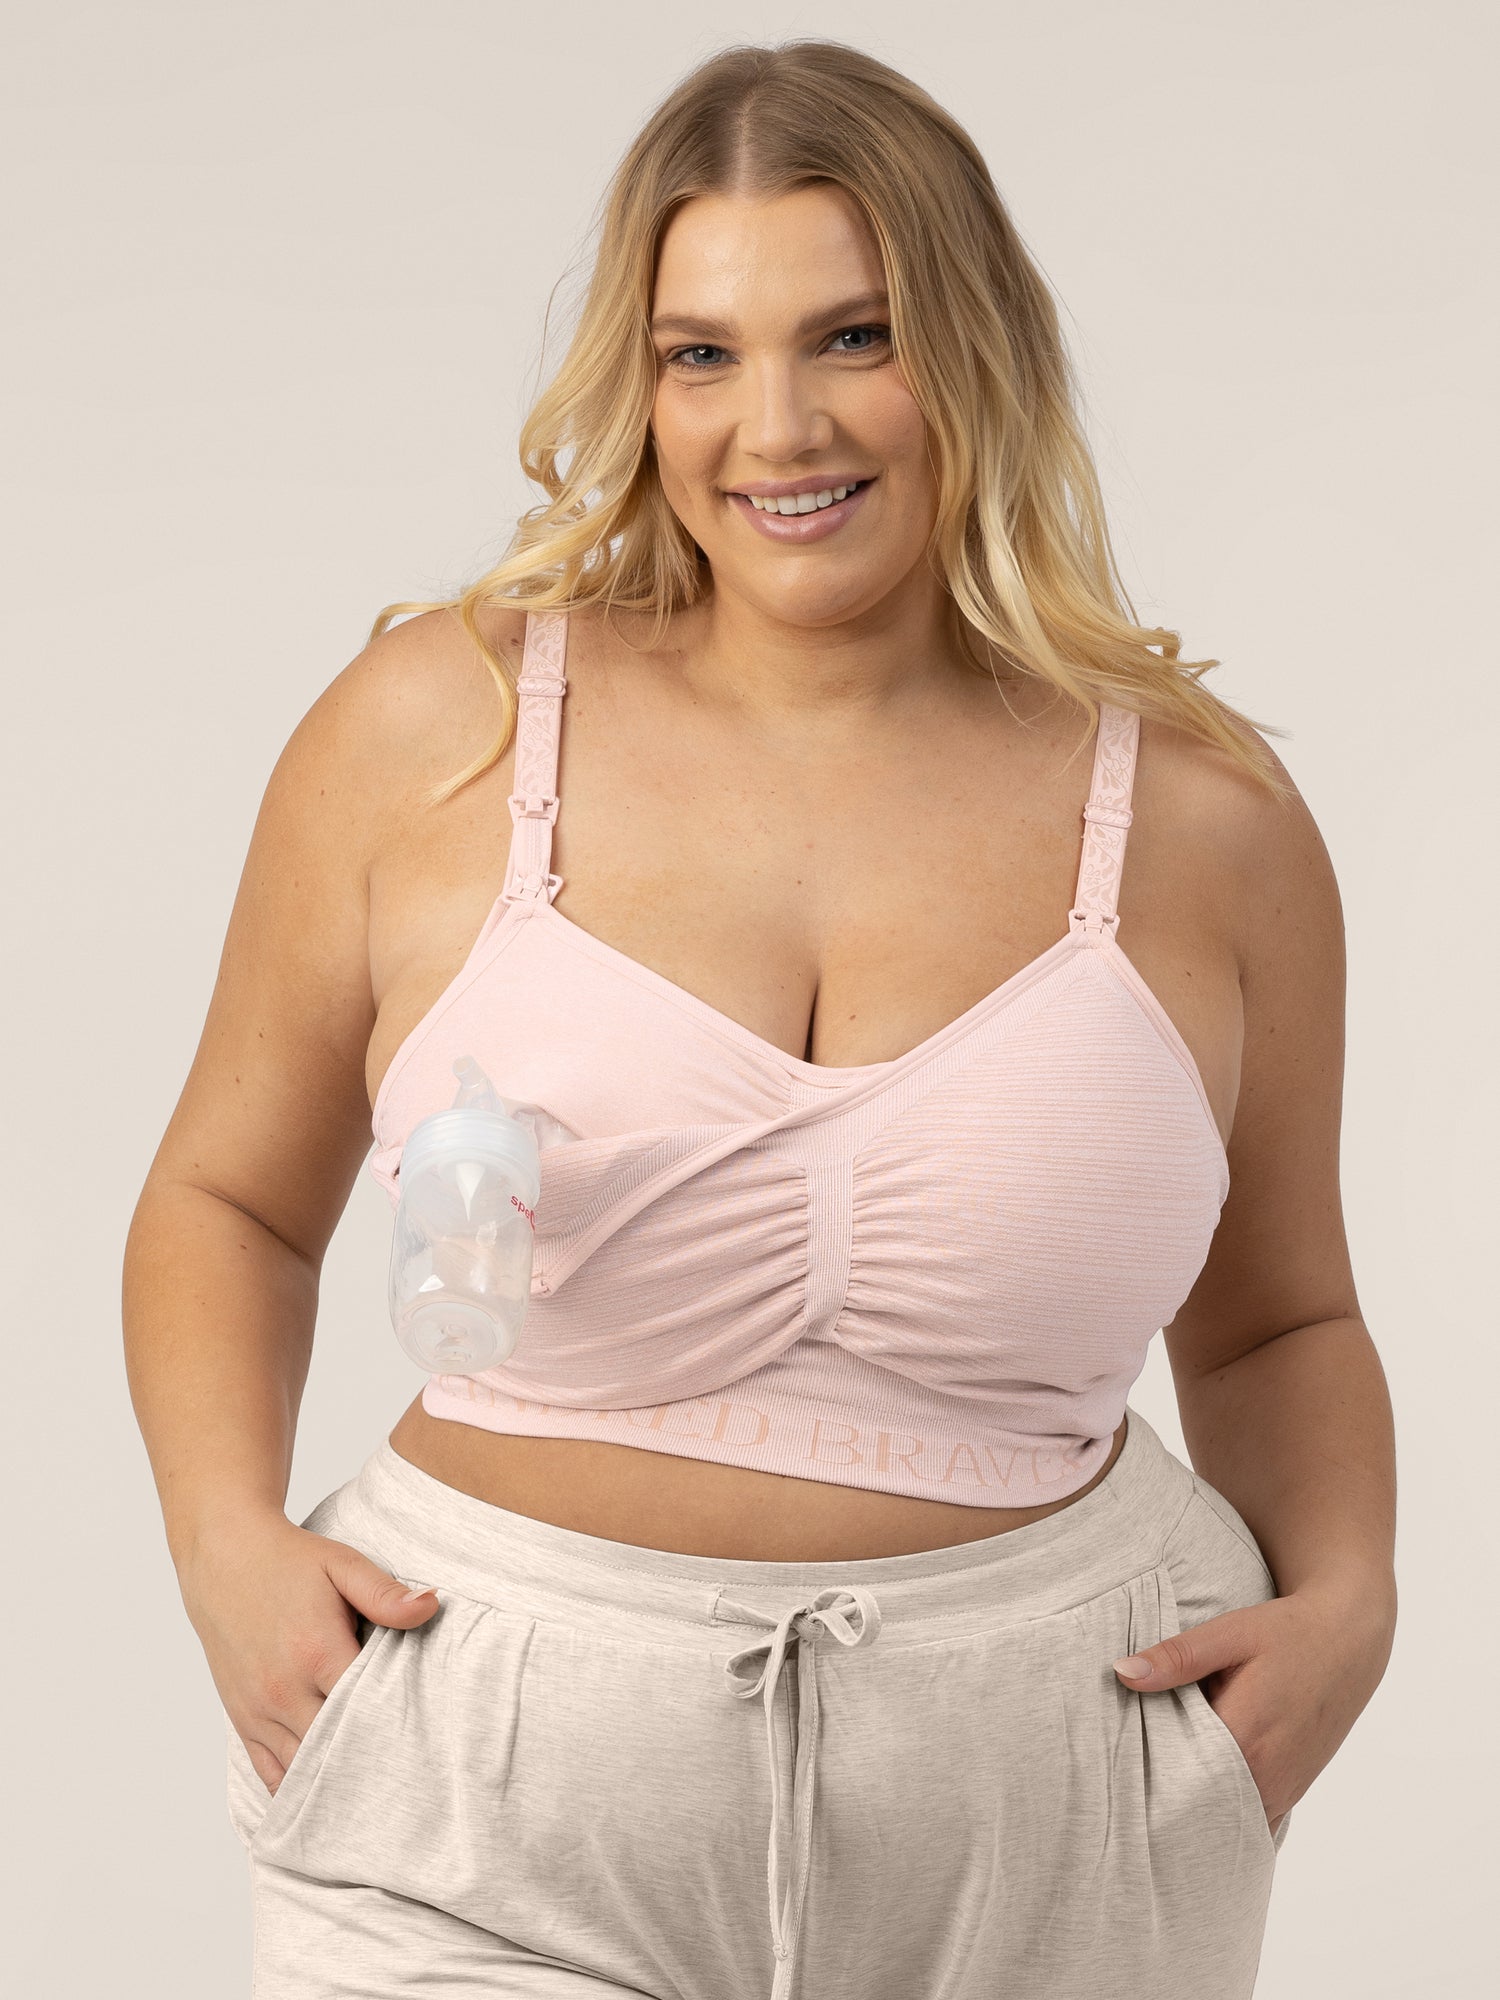 Momcozy Hands Free 4-in-1 Pumping Bra, Maternity Nursing Bras & Everyday Bra,Cotton-Modal  Comfort and Support for Spectra, Medela, Elvie, Willow and More